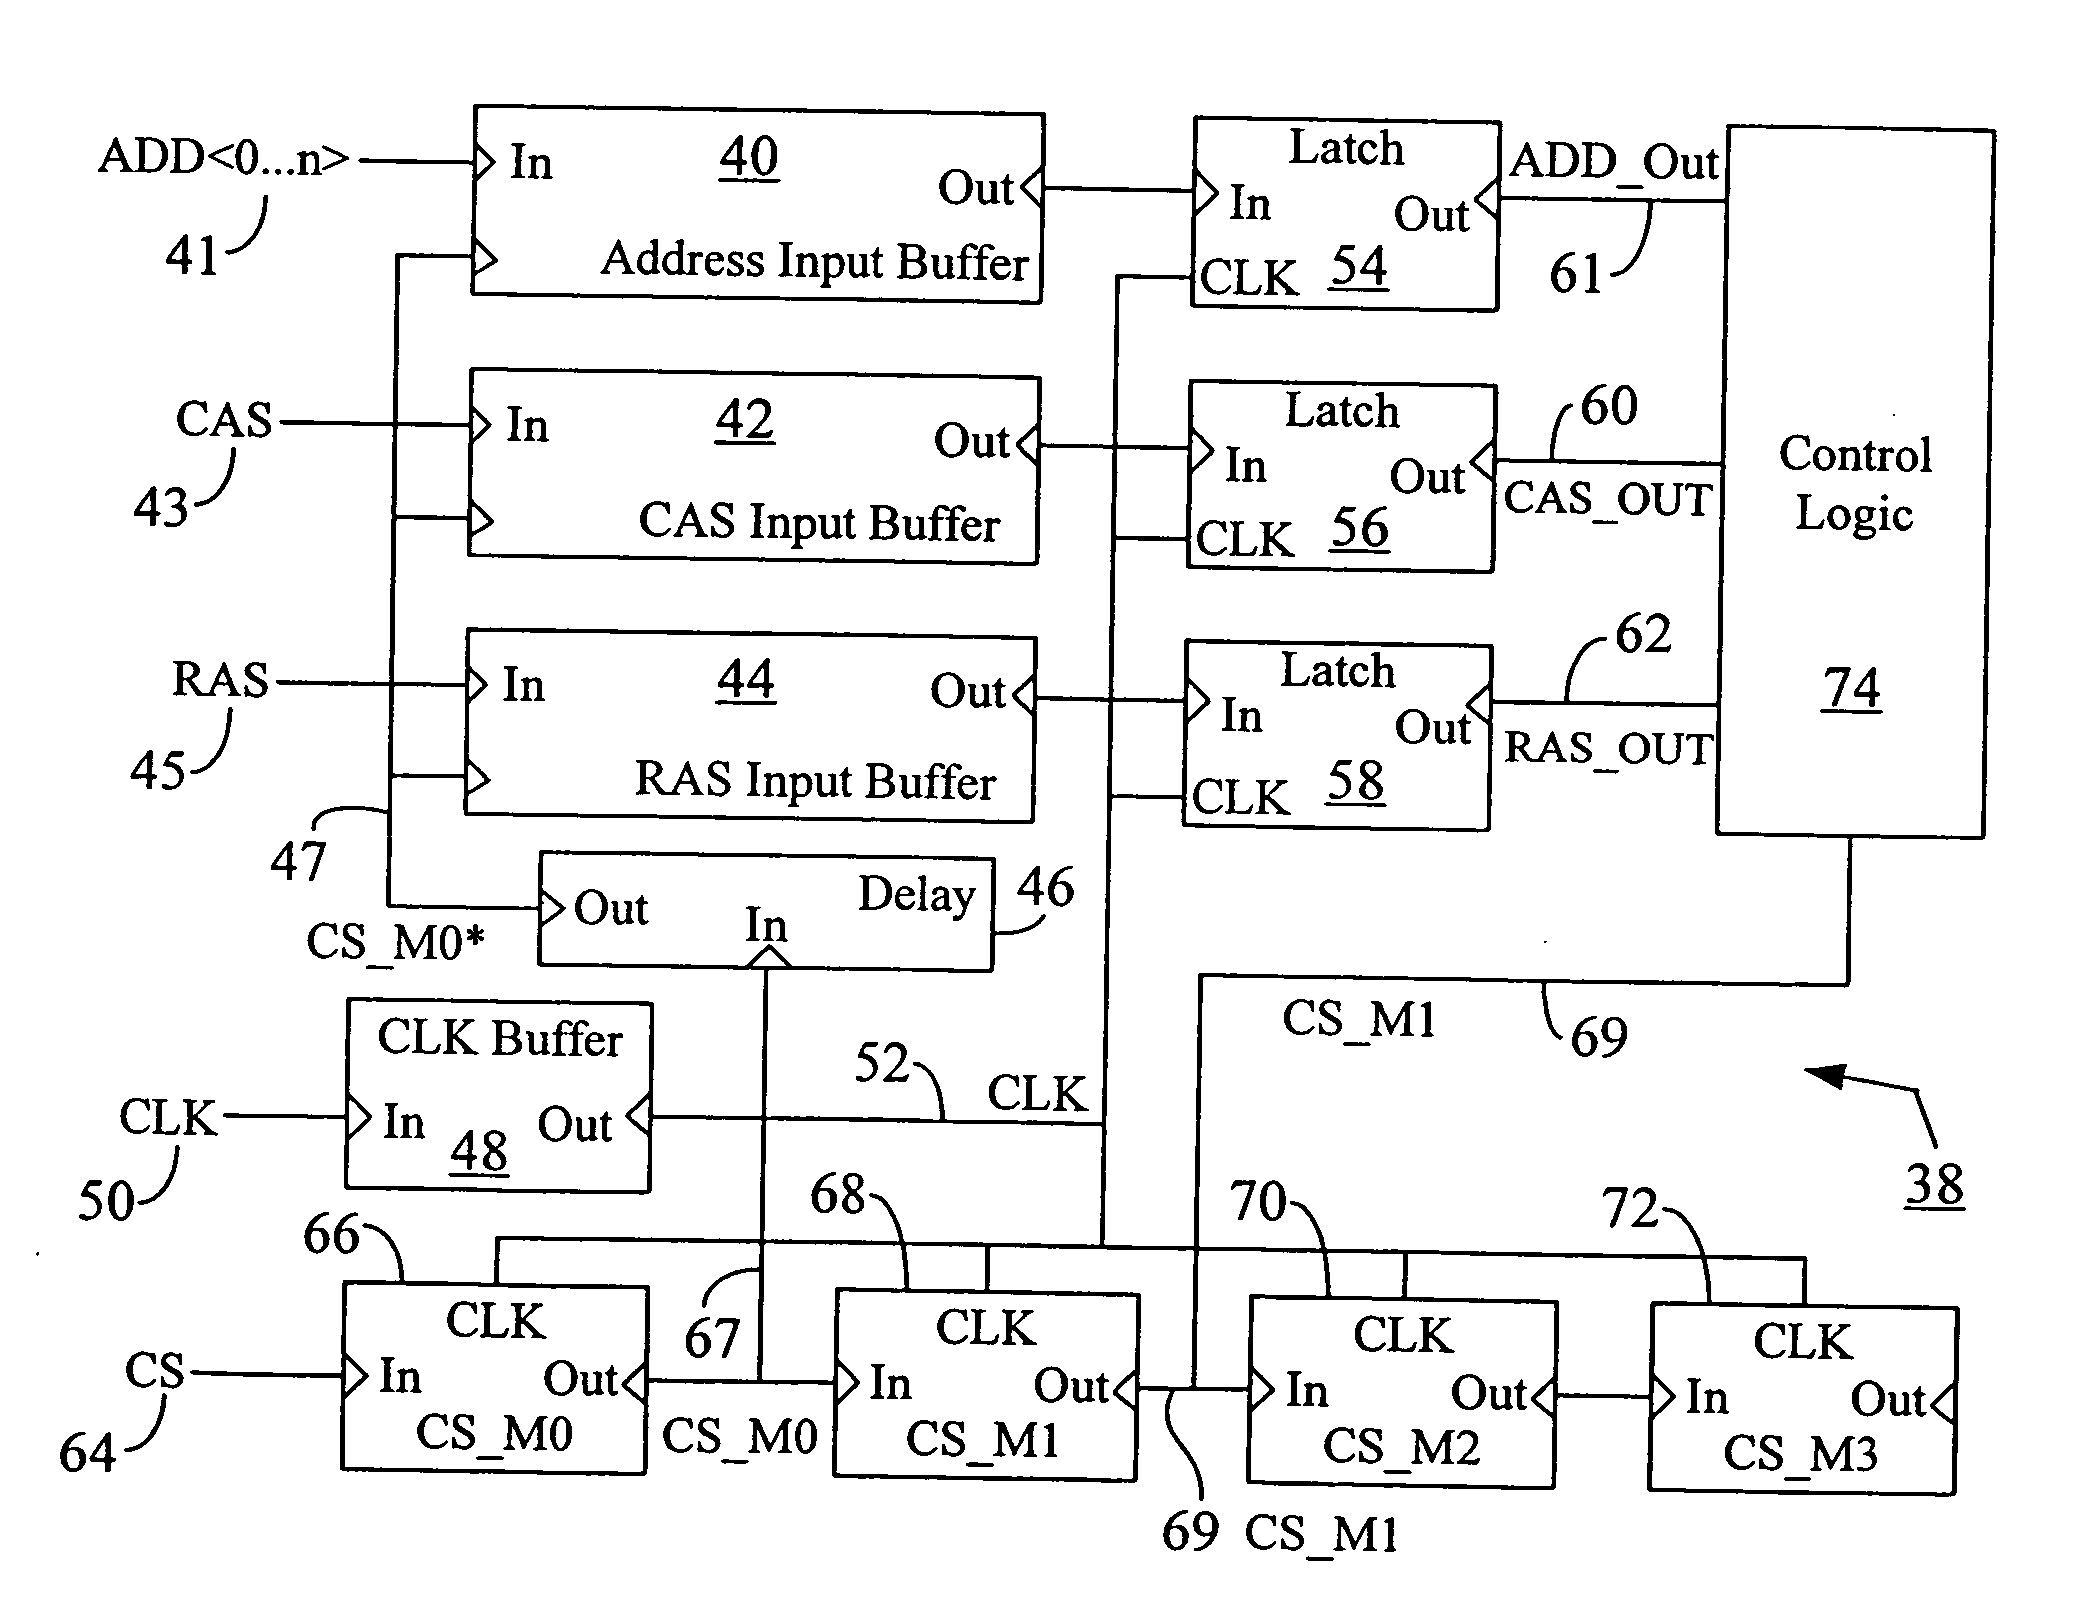 Low power chip select (CS) latency option